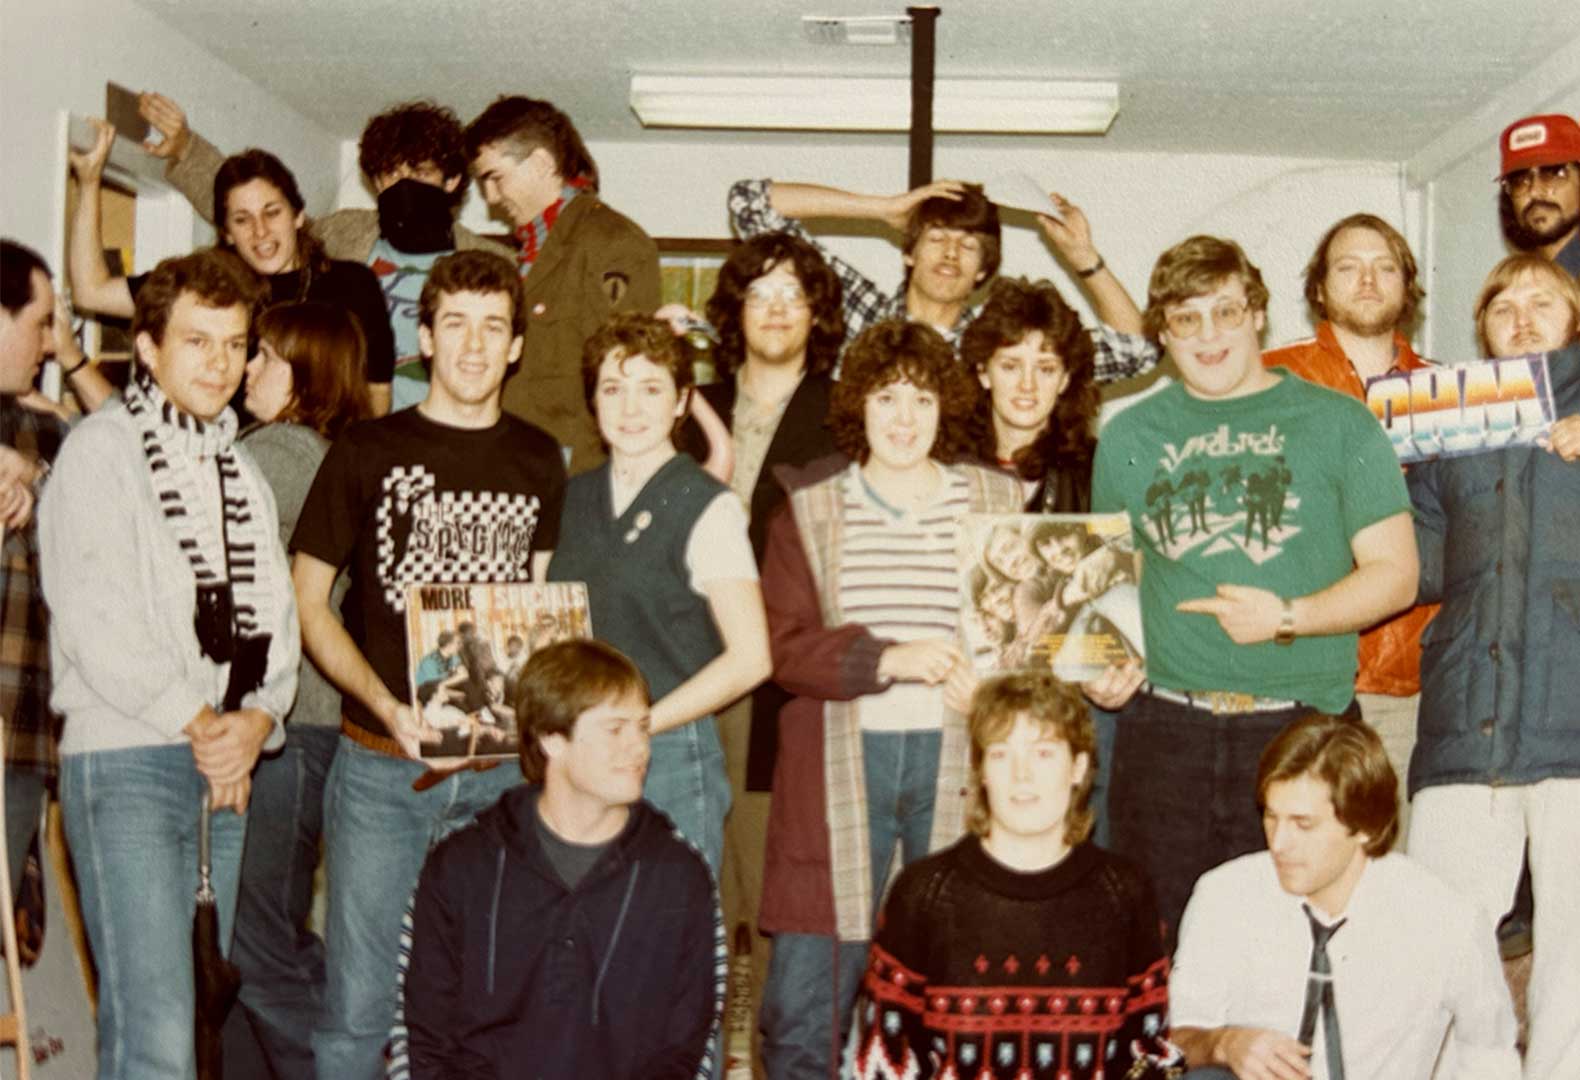 A photograph taken in 1981 featuring student employees at the on-campus radio station, KCSC.